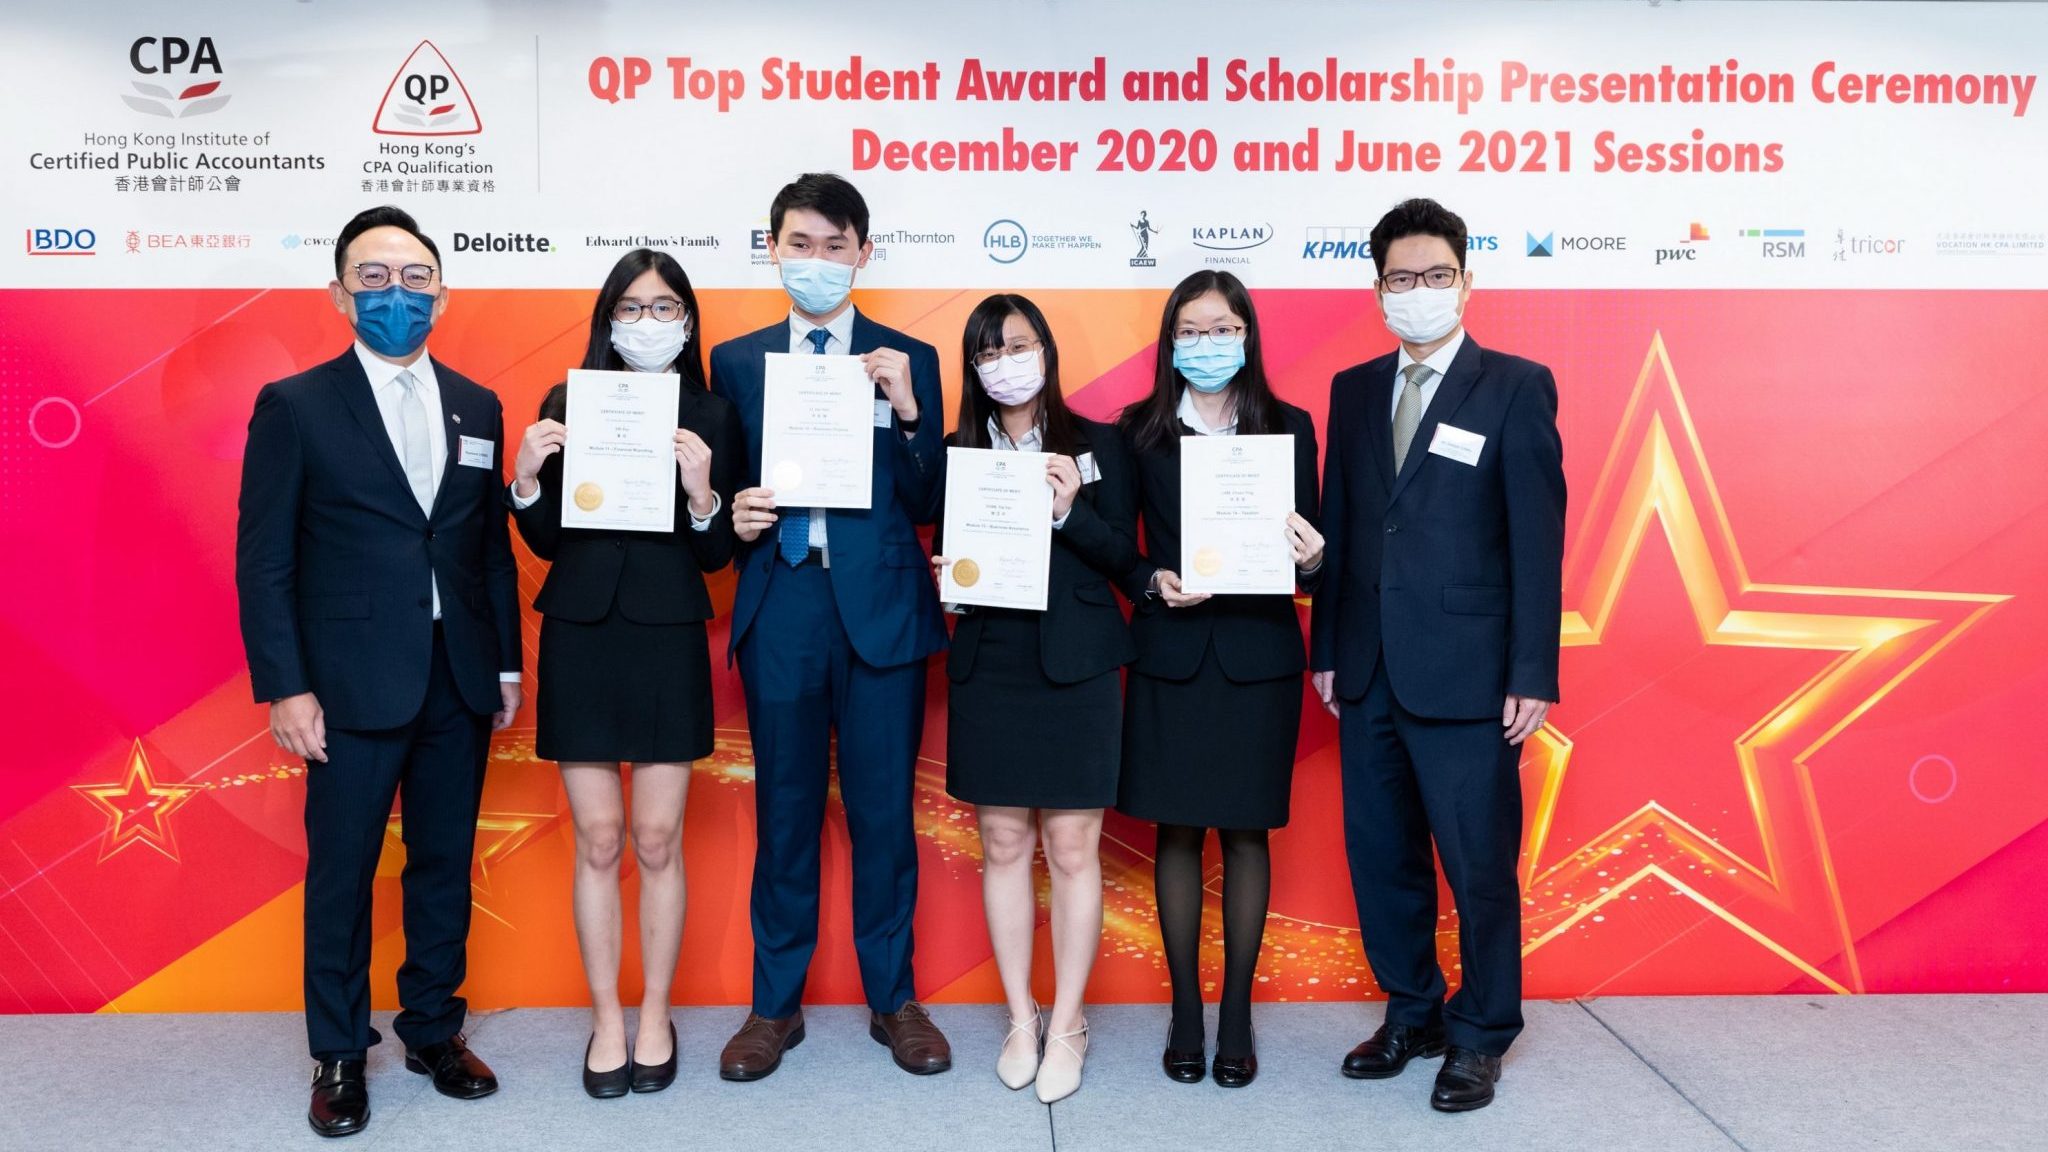 U:\Marketing and Communications\Editorial Content\School News\2022\202203_PACC Graduates in HKICPA QP Examination\Photo from HKICPA